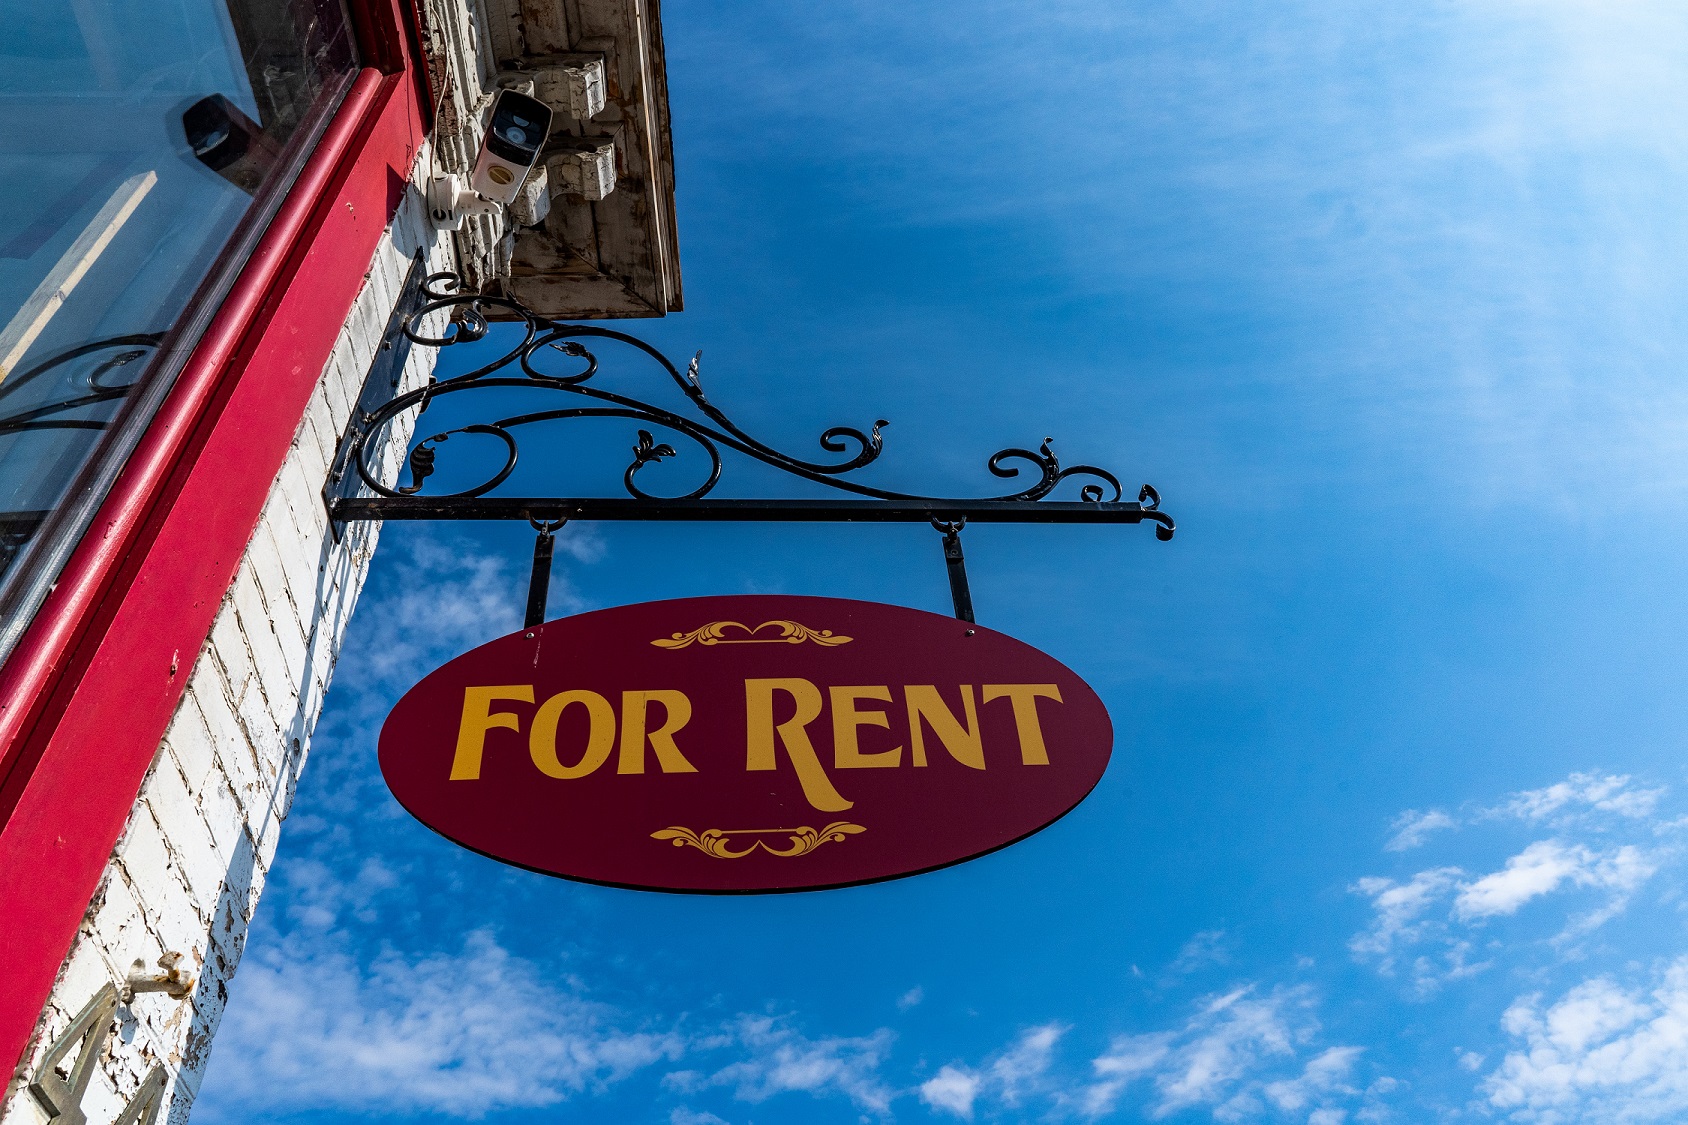 The side of a building with a "for rent" sign hanging against a clear blue sky.